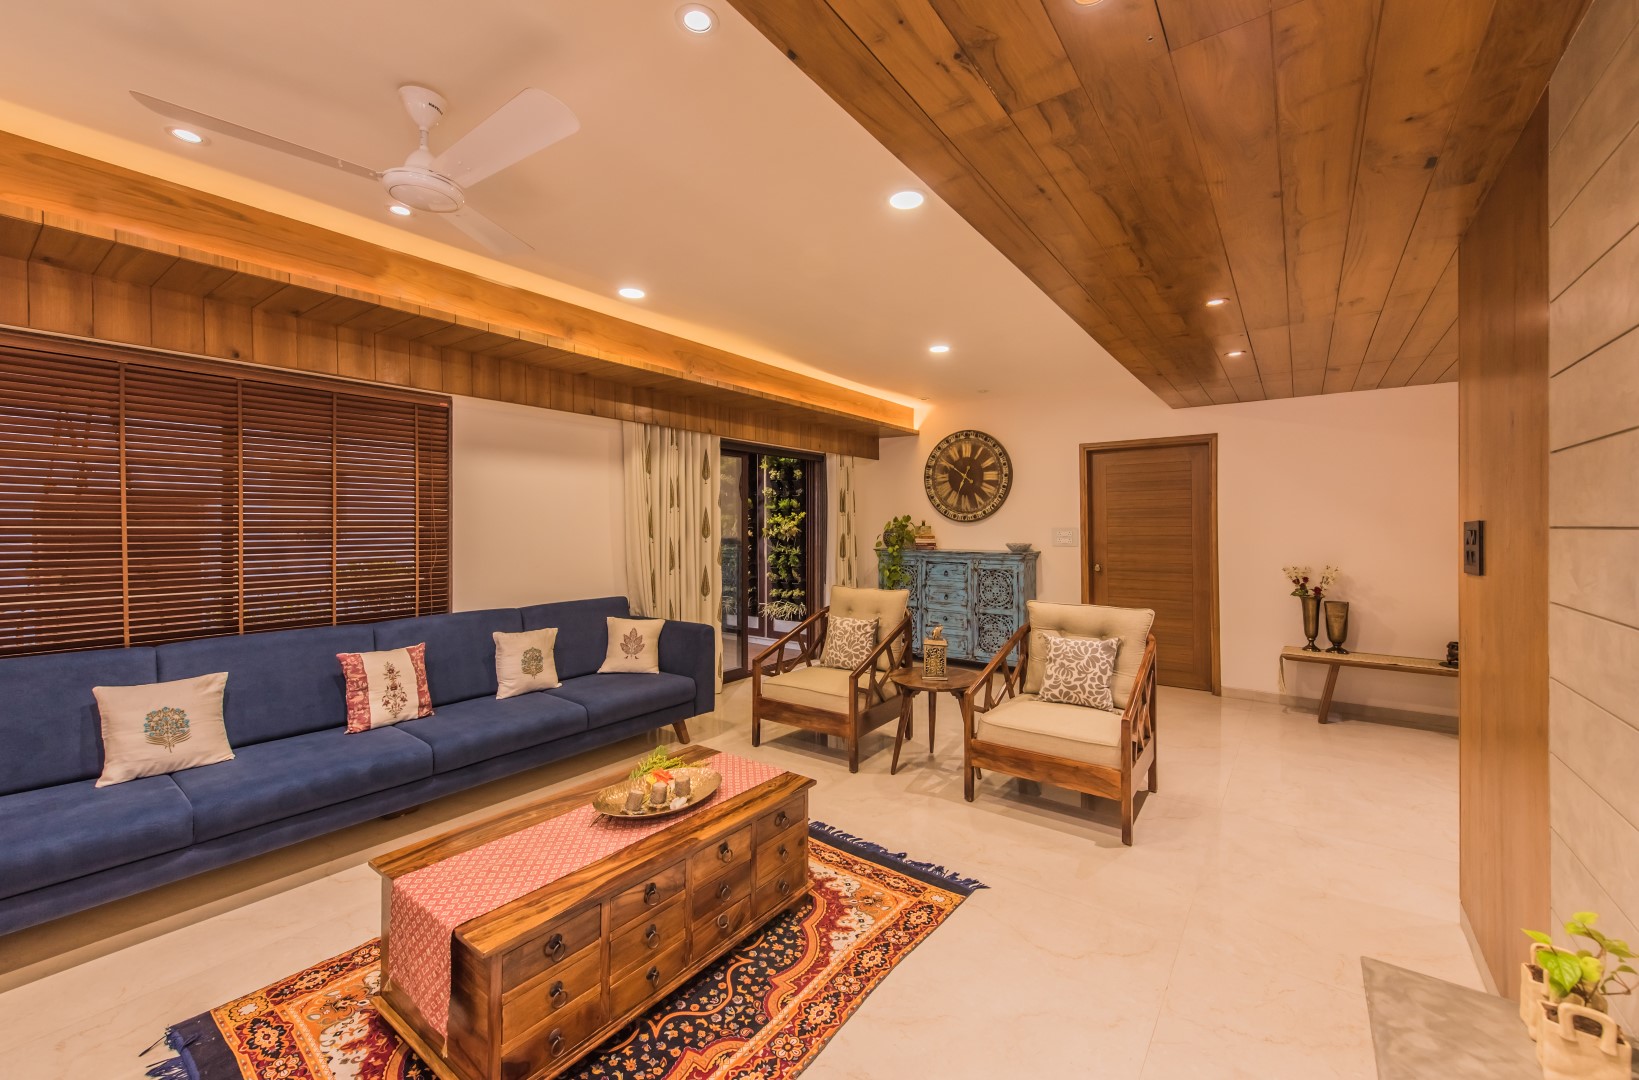 Contemporary Indian House in Indore | Aarambh Design Studio - The  Architects Diary | Study room design, Ceiling design living room, Modern  bedroom furniture